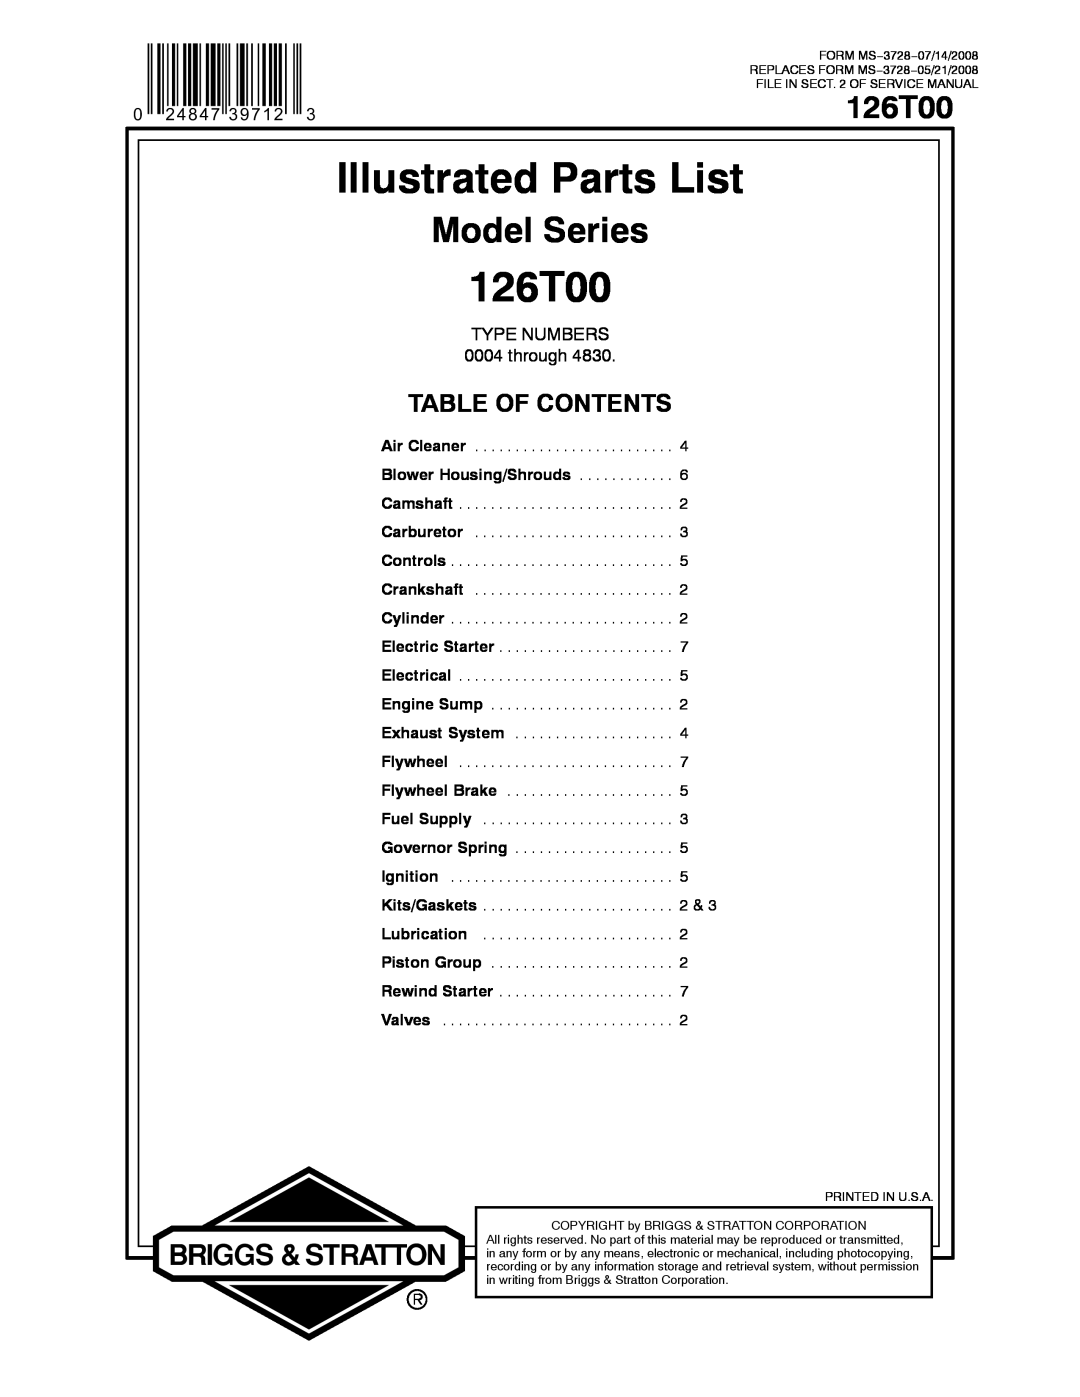 Snapper 126T00 service manual Illustrated Parts List, Model Series, Table Of Contents, TYPE NUMBERS 0004 through 